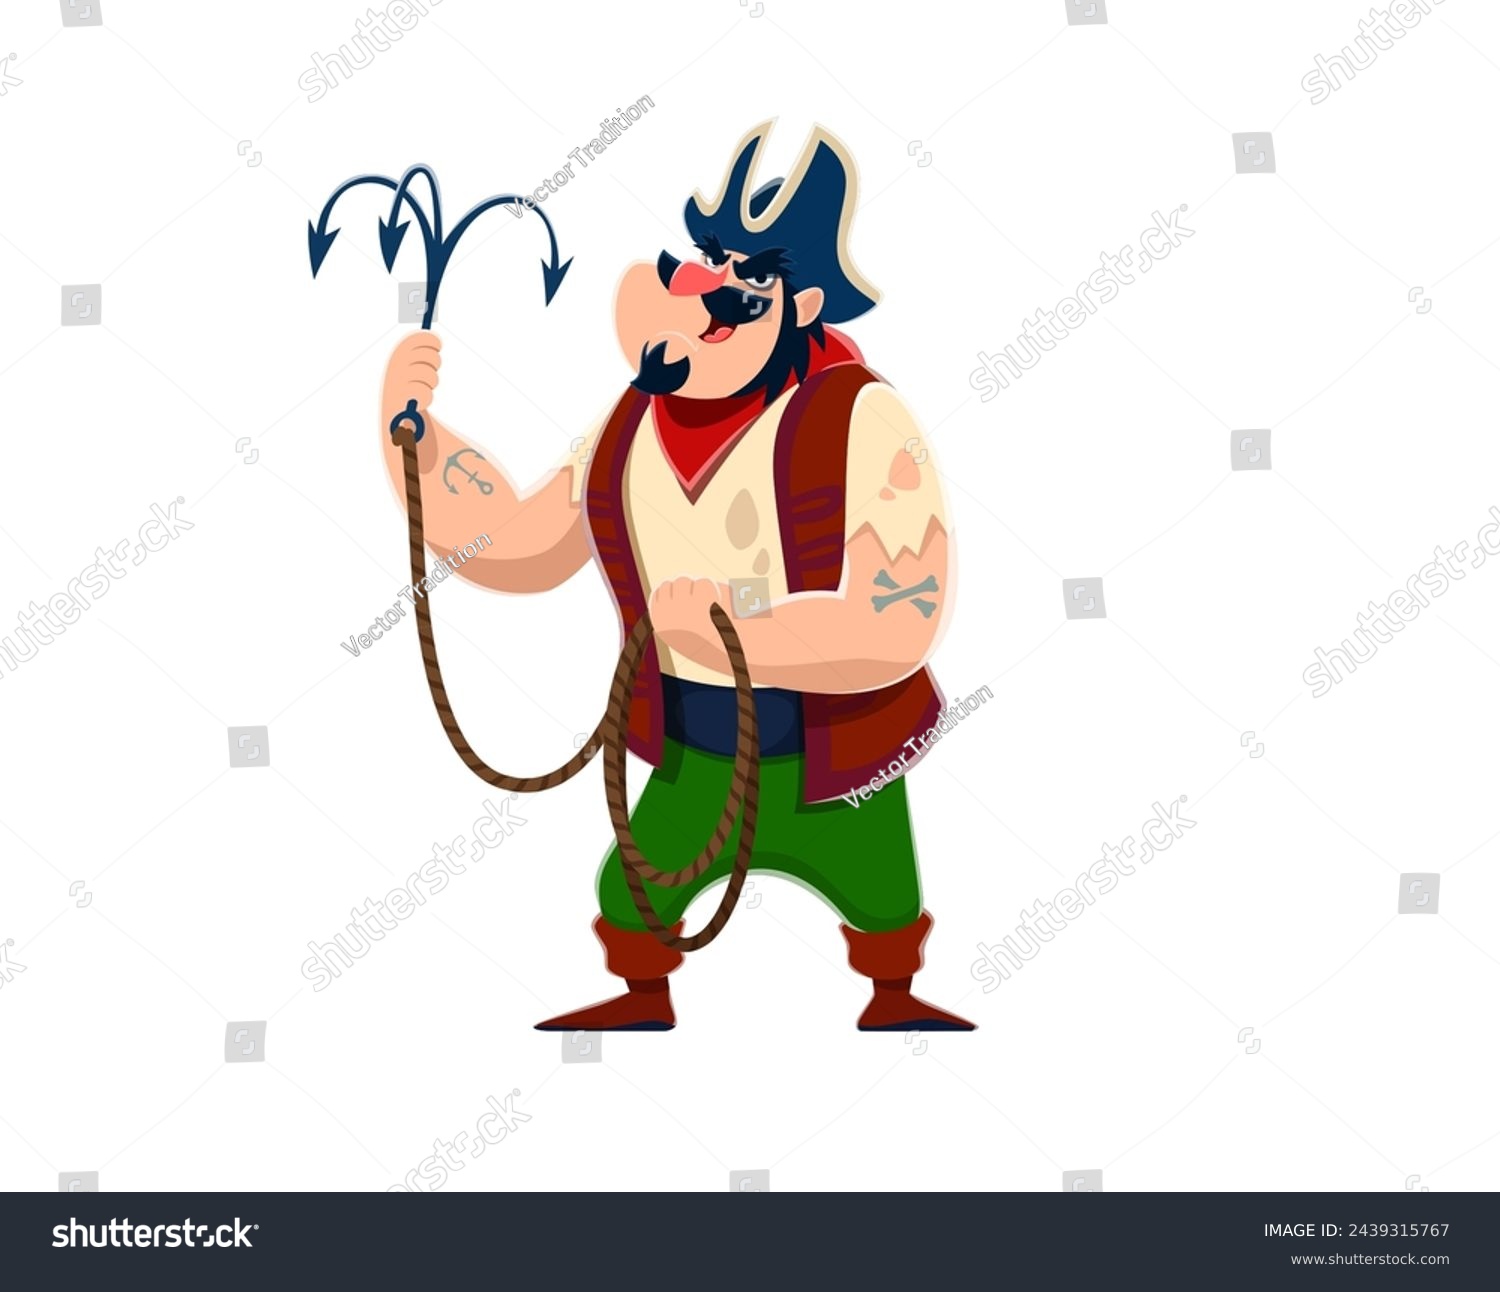 SVG of Cartoon pirate sailor character with grappling hook. Isolated vector swashbuckling, adventurous buccaneer in vest, eye patch and tricorn, bearded corsair ready for robbery and boarding ships in sea svg